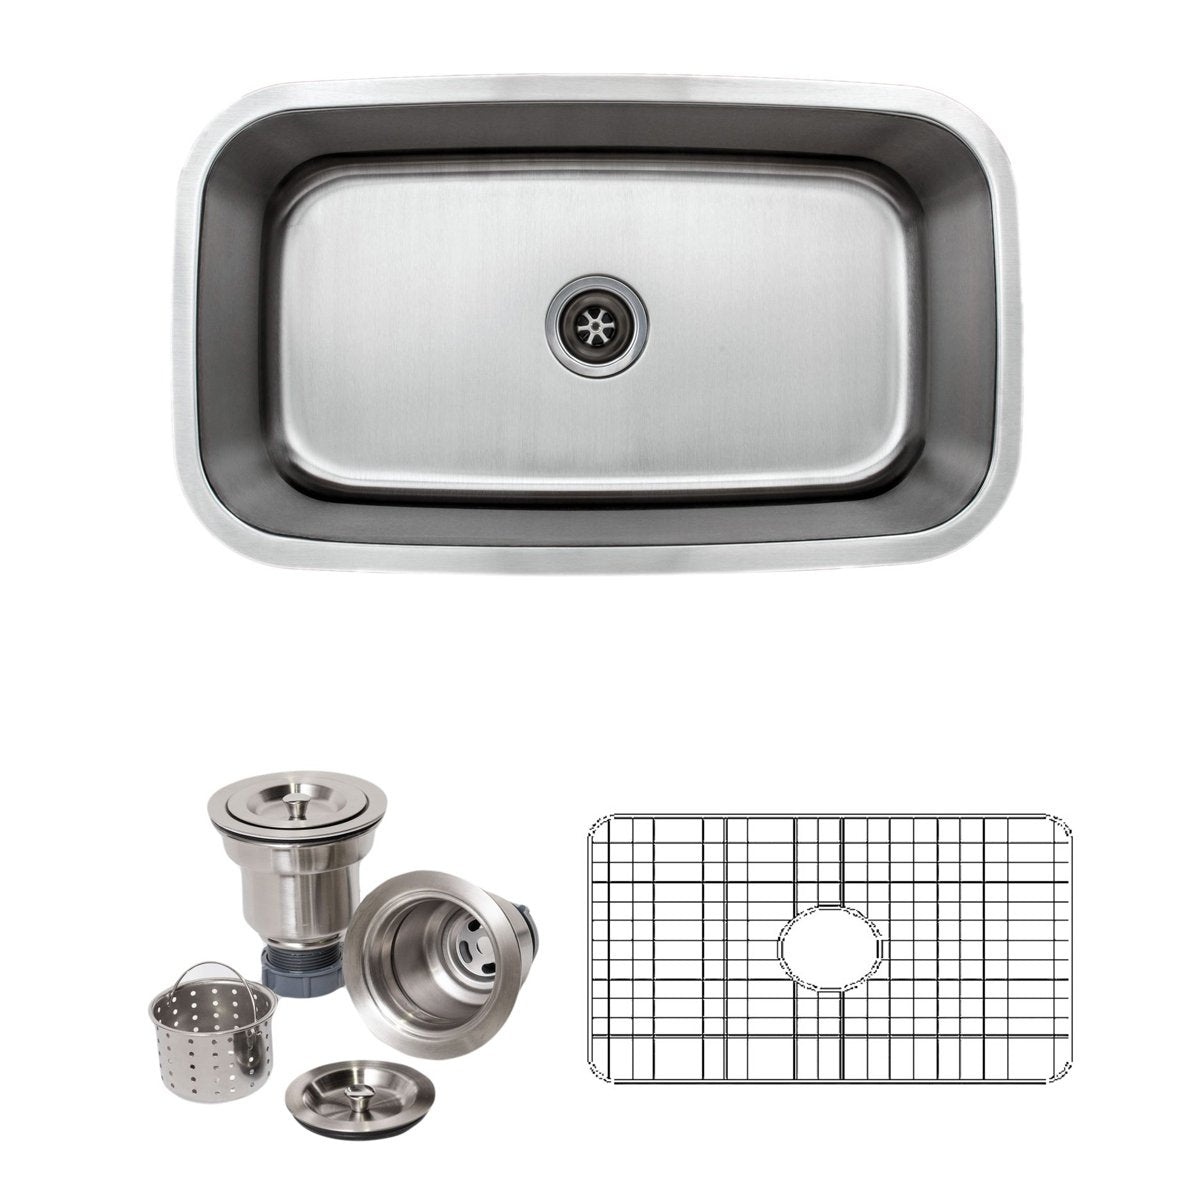 Wells Sinkware 32-Inch 18-Gauge Undermount Single Bowl Stainless Steel Kitchen Sink with Grid Rack and Basket Strainer-Kitchen Sinks Fast Shipping at Directsinks.